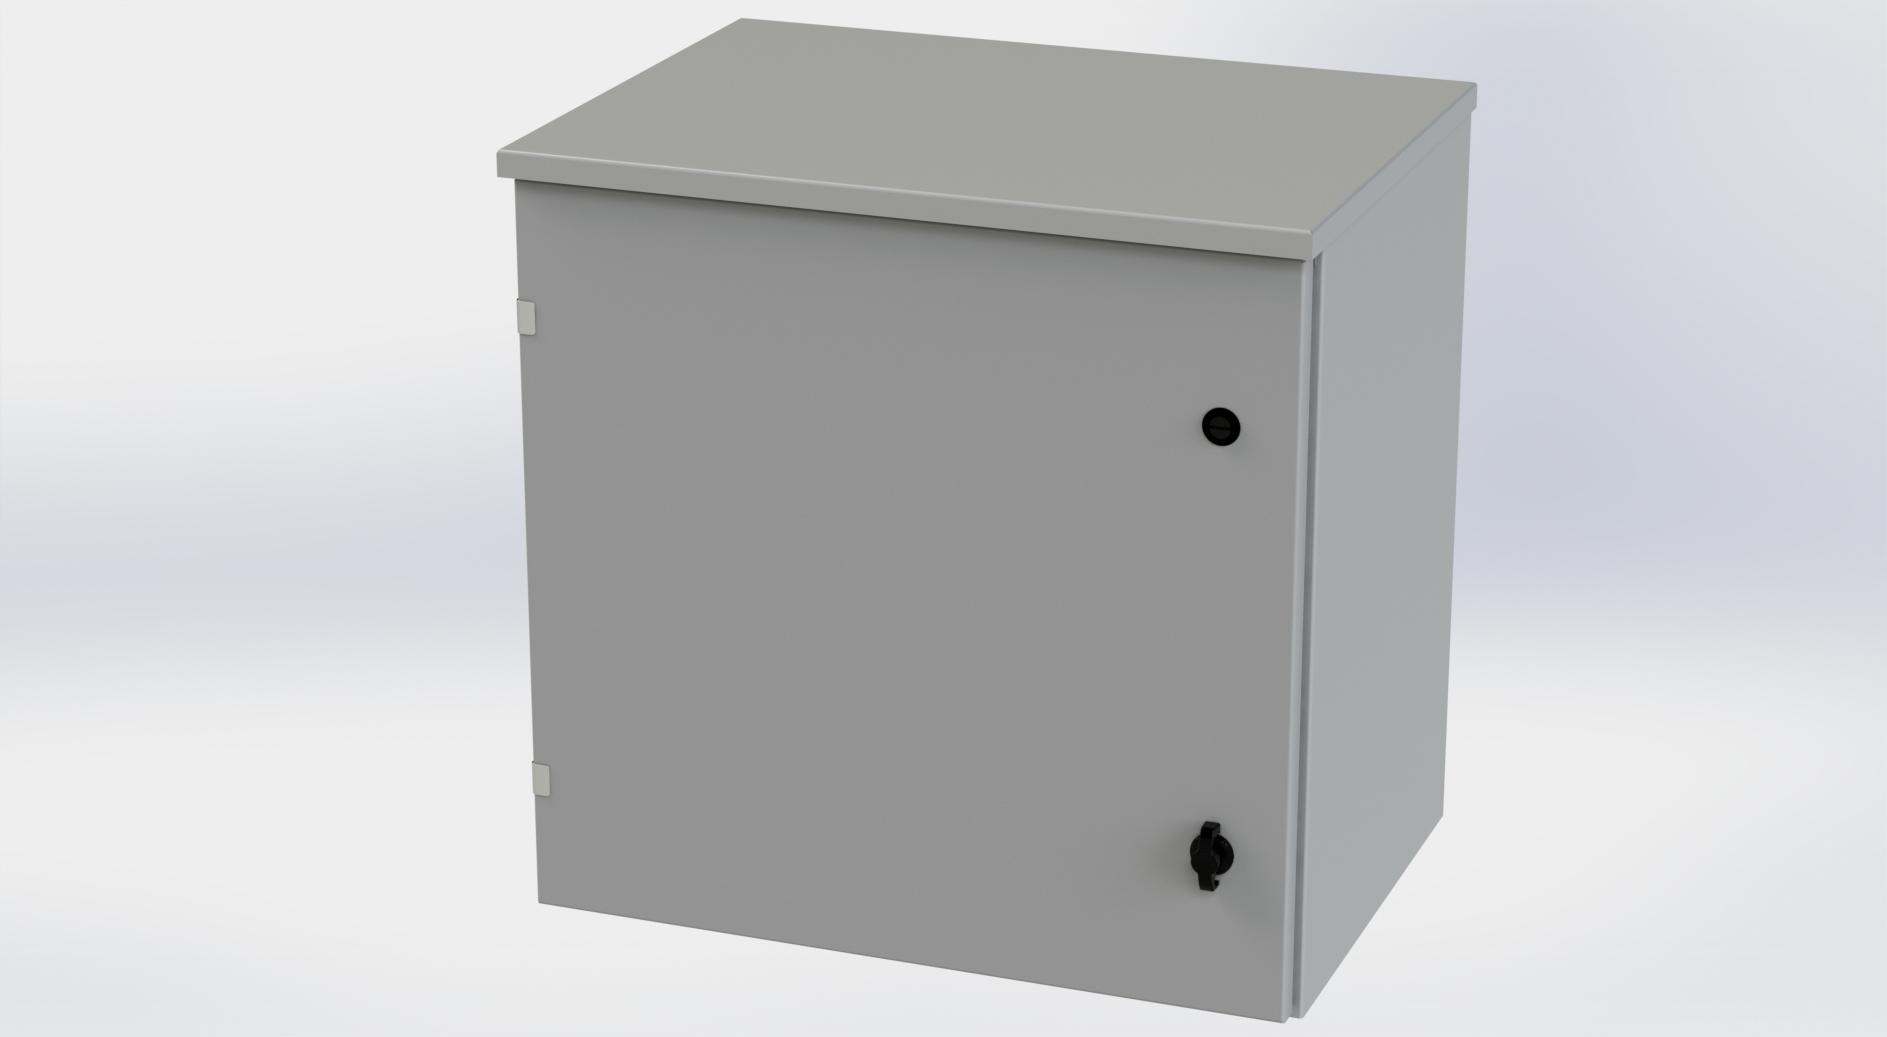 Saginaw Control SCE-24R2416LP Type-3R Hinged Cover Enclosure, Height:24.00", Width:24.00", Depth:16.00", ANSI-61 gray powder coating inside and out. Optional sub-panels are powder coated white.